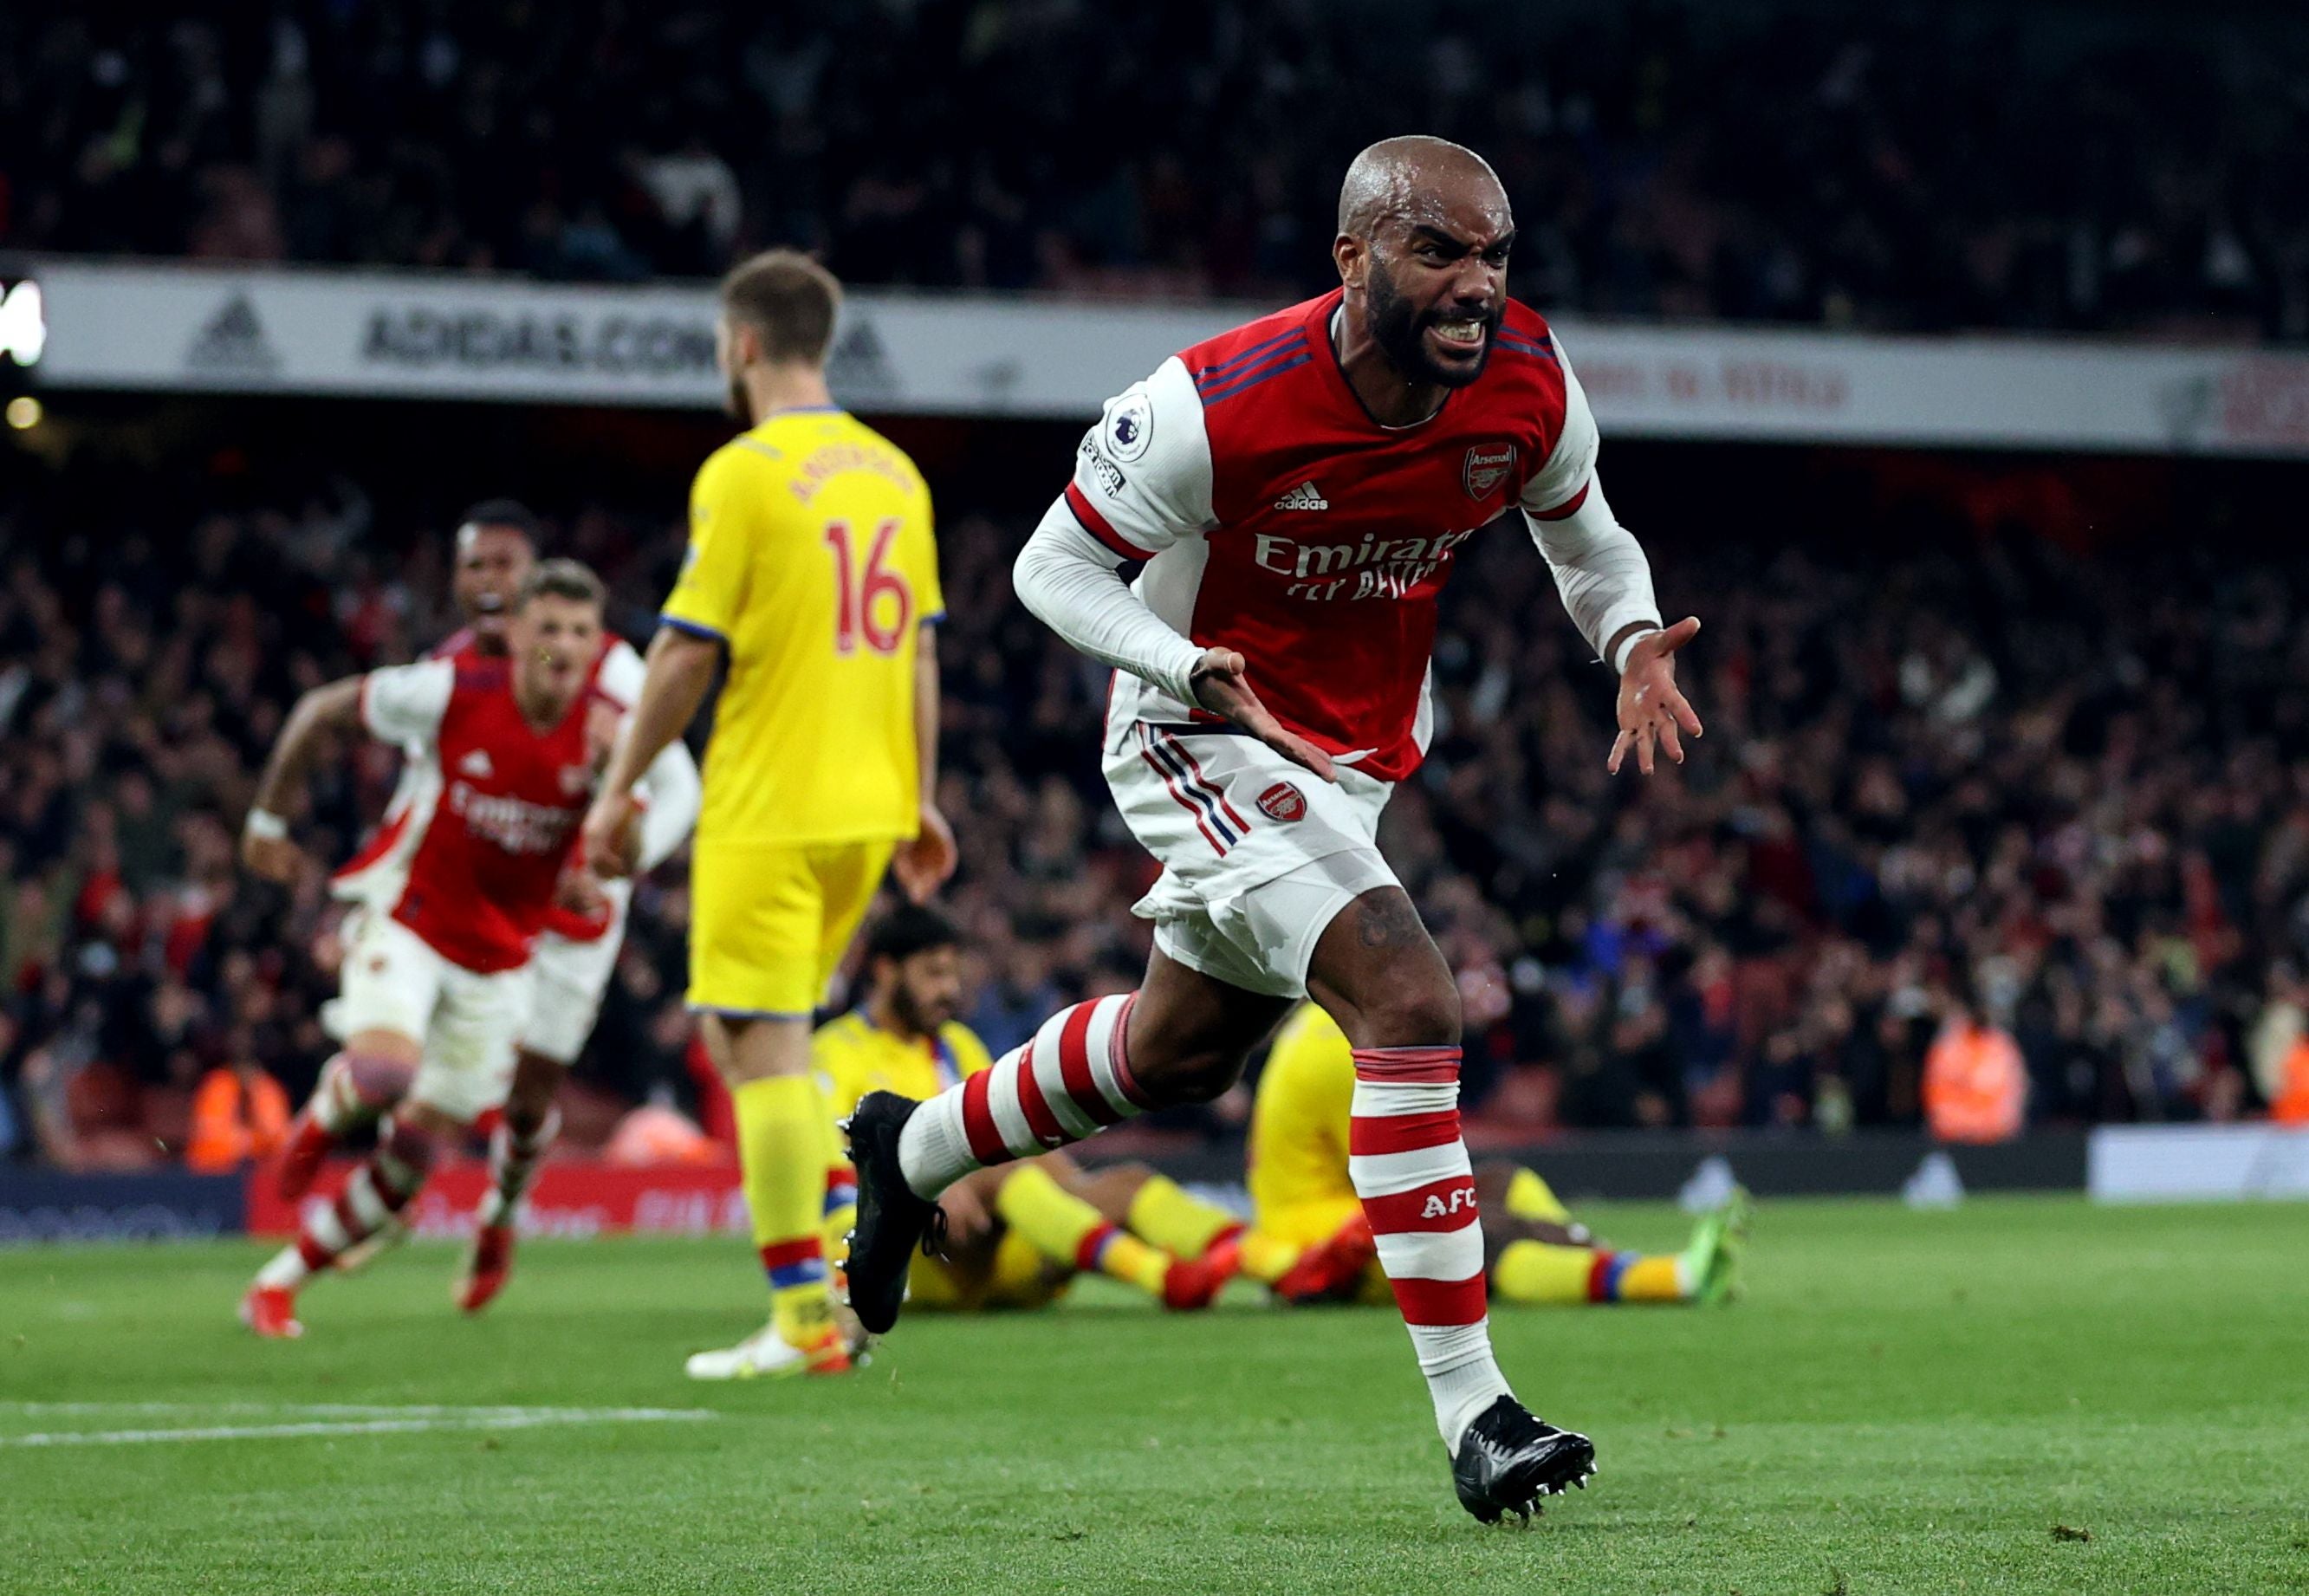 Lacazette Saves a Point Late On for Arsenal!